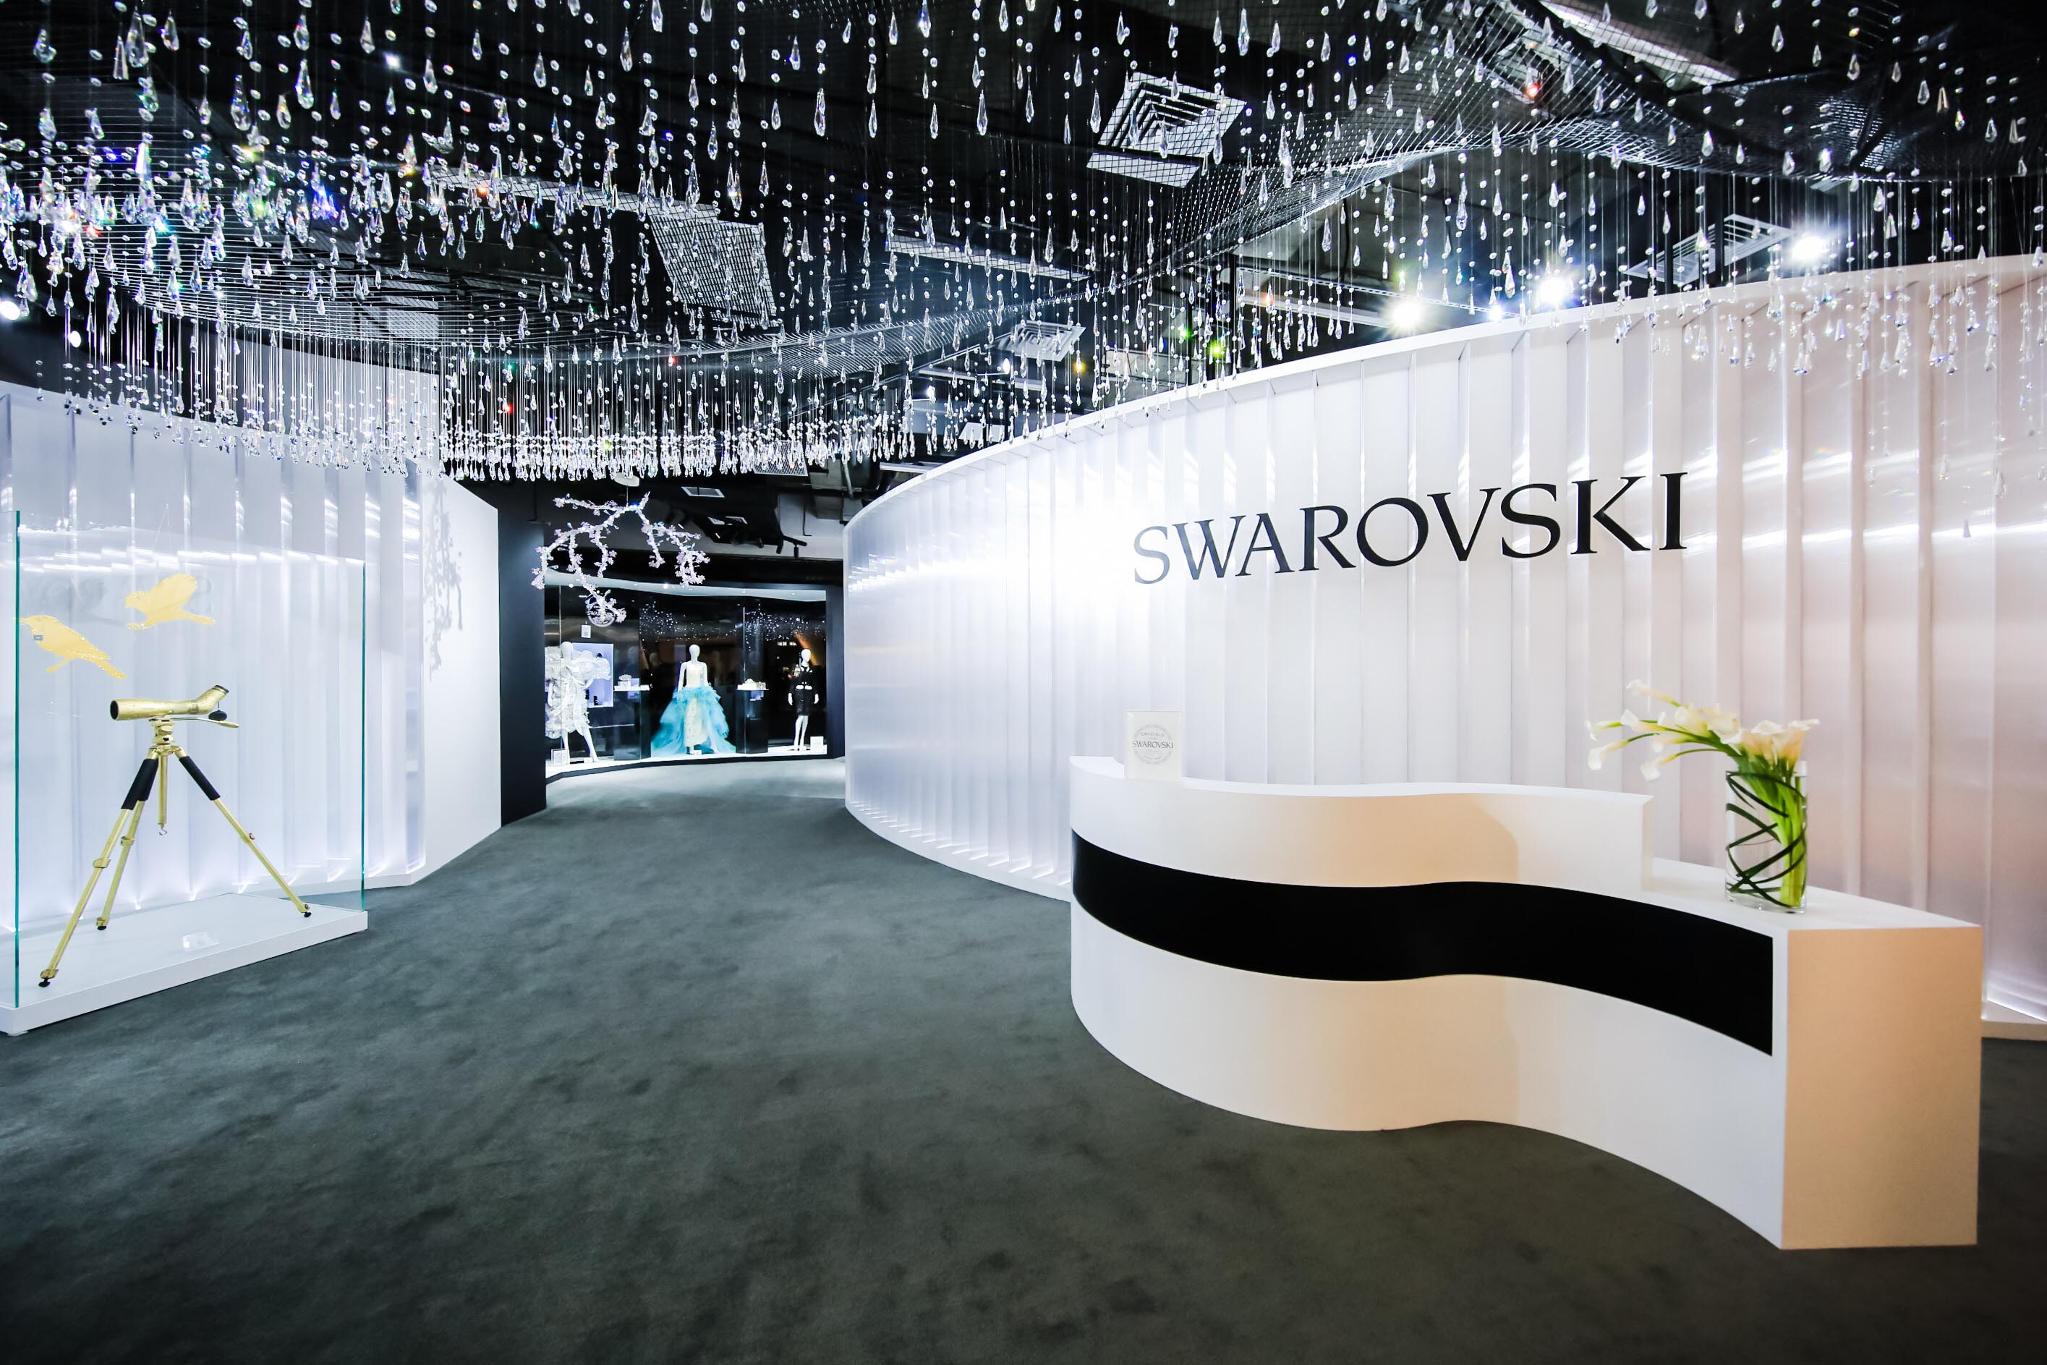 Swarovski partners with Tasa Meng for summer pop-up in Taoyuan Airport